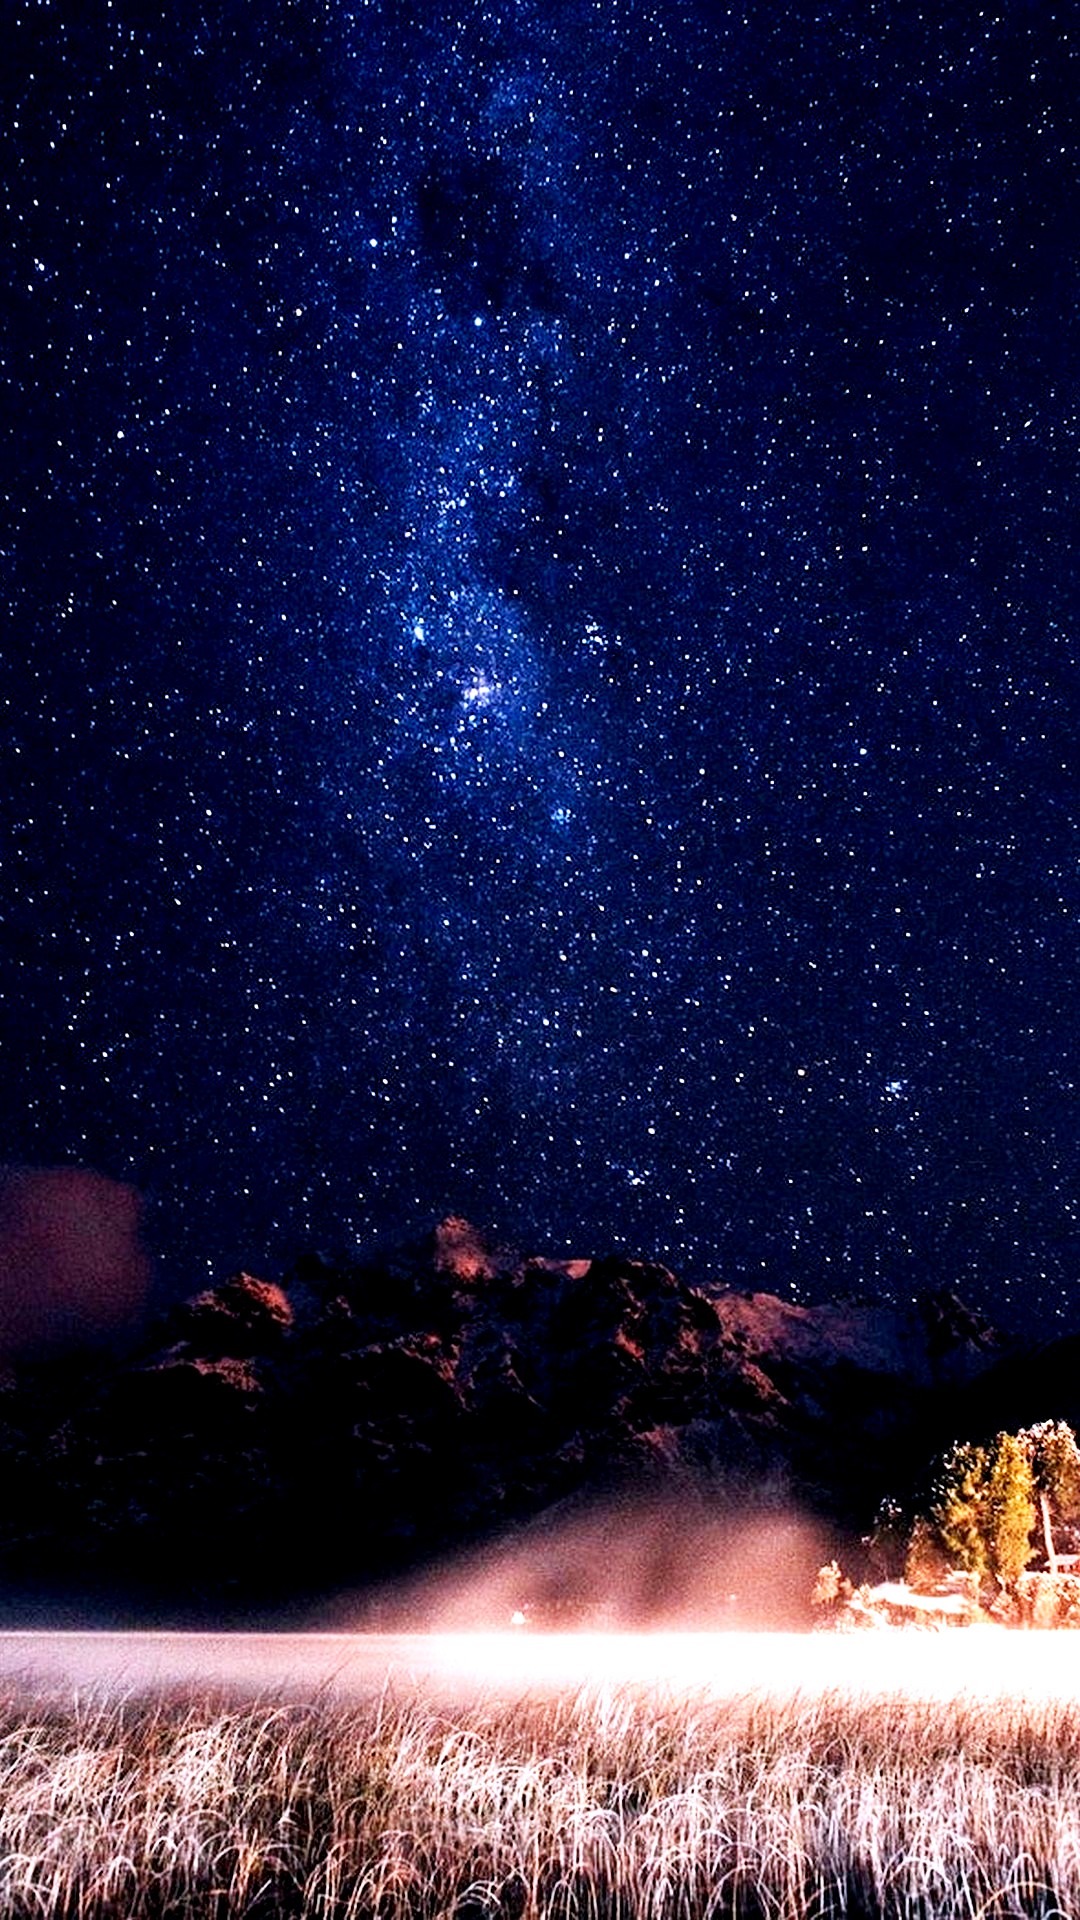 Stars Aesthetic iPhone 8 Wallpaper With high-resolution 1080X1920 pixel. You can use this wallpaper for your iPhone 5, 6, 7, 8, X, XS, XR backgrounds, Mobile Screensaver, or iPad Lock Screen